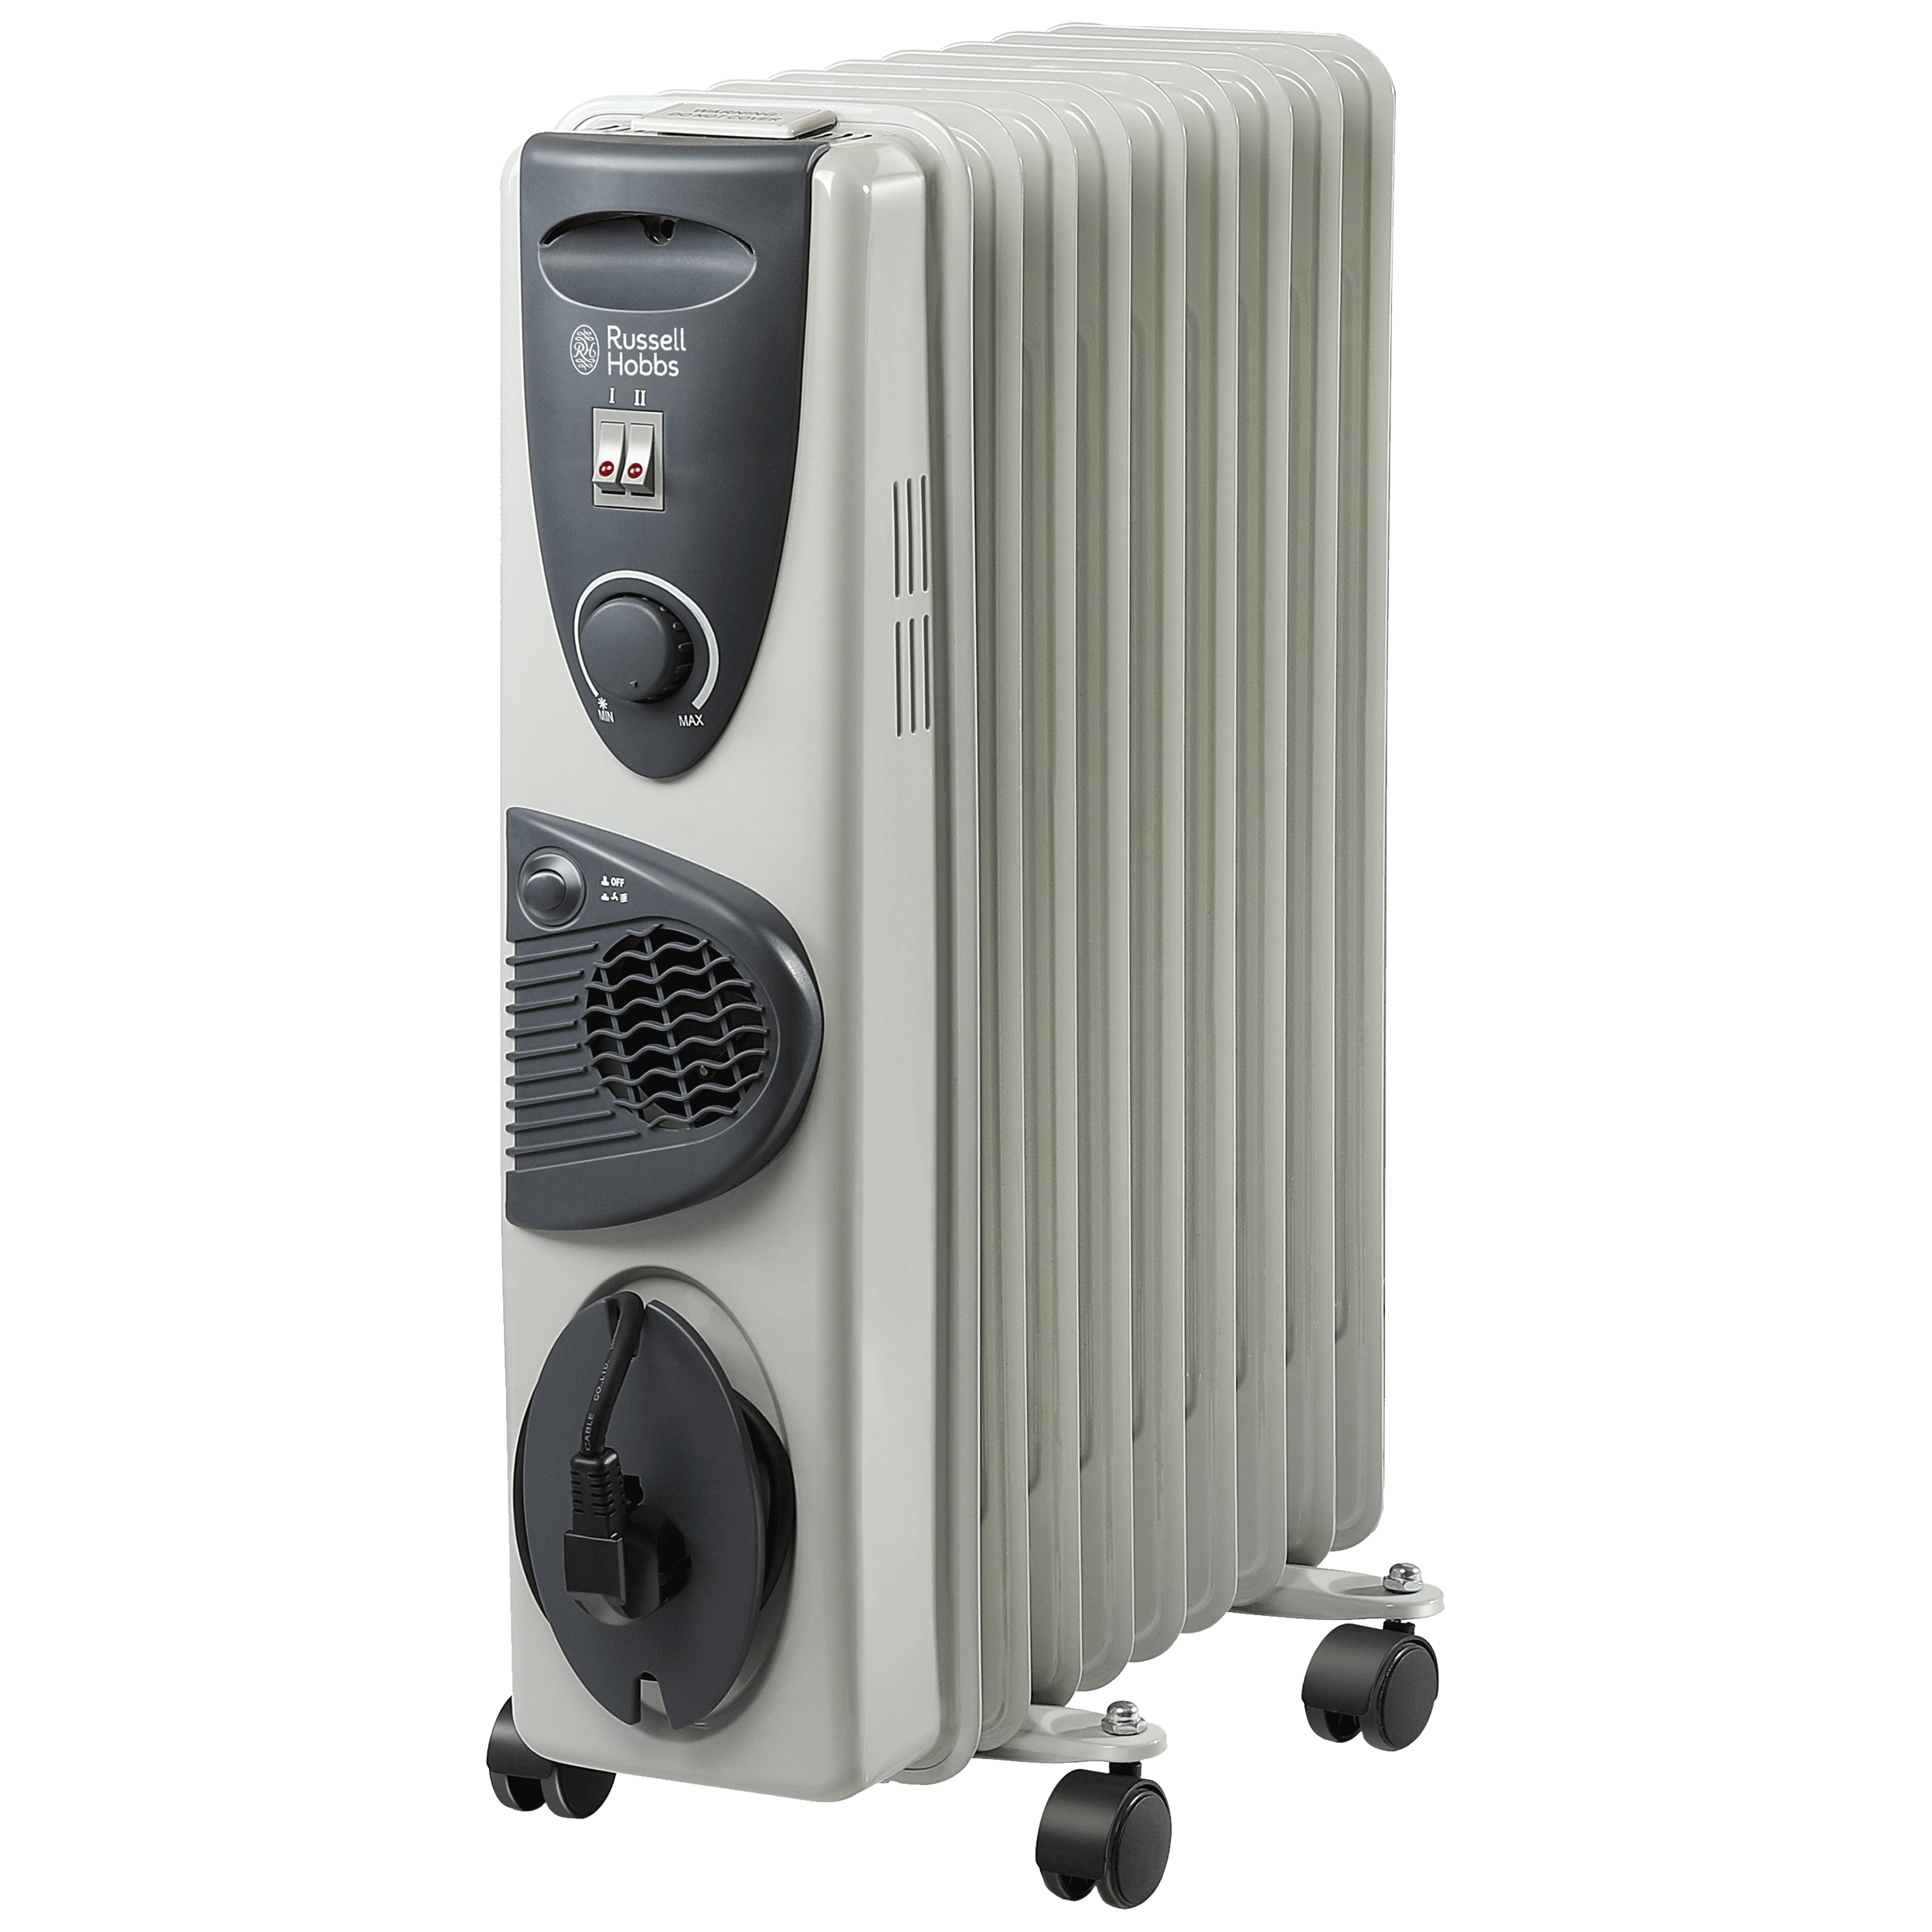 Russell Hobbs - Russell Hobbs 2000 Watts Oil Filled Room Heater (ROR09, Silver)